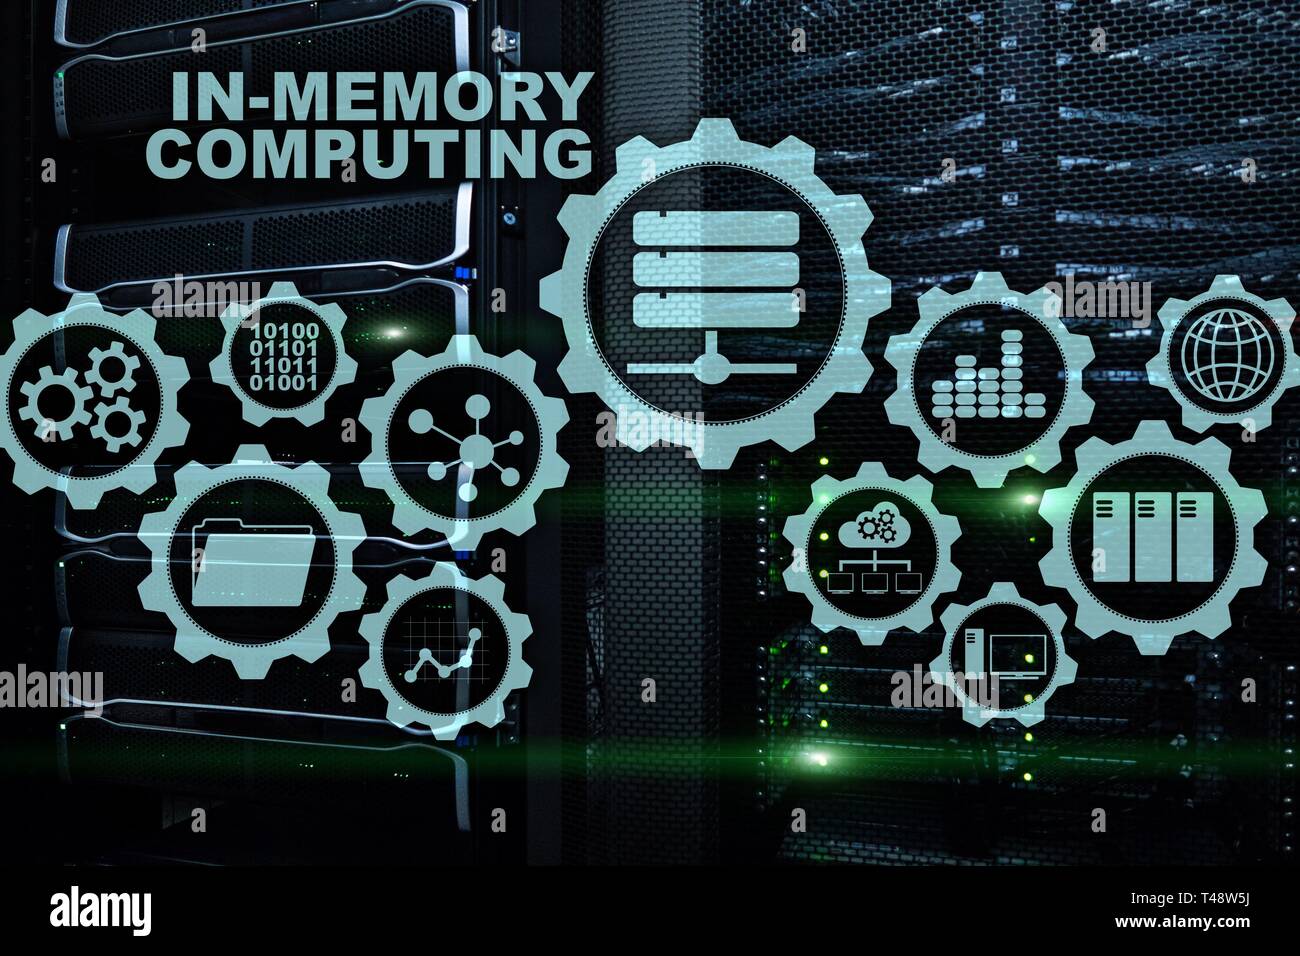 In-Memory Computing. Technology Calculations Concept. High-Performance Analytic Appliance Stock Photo